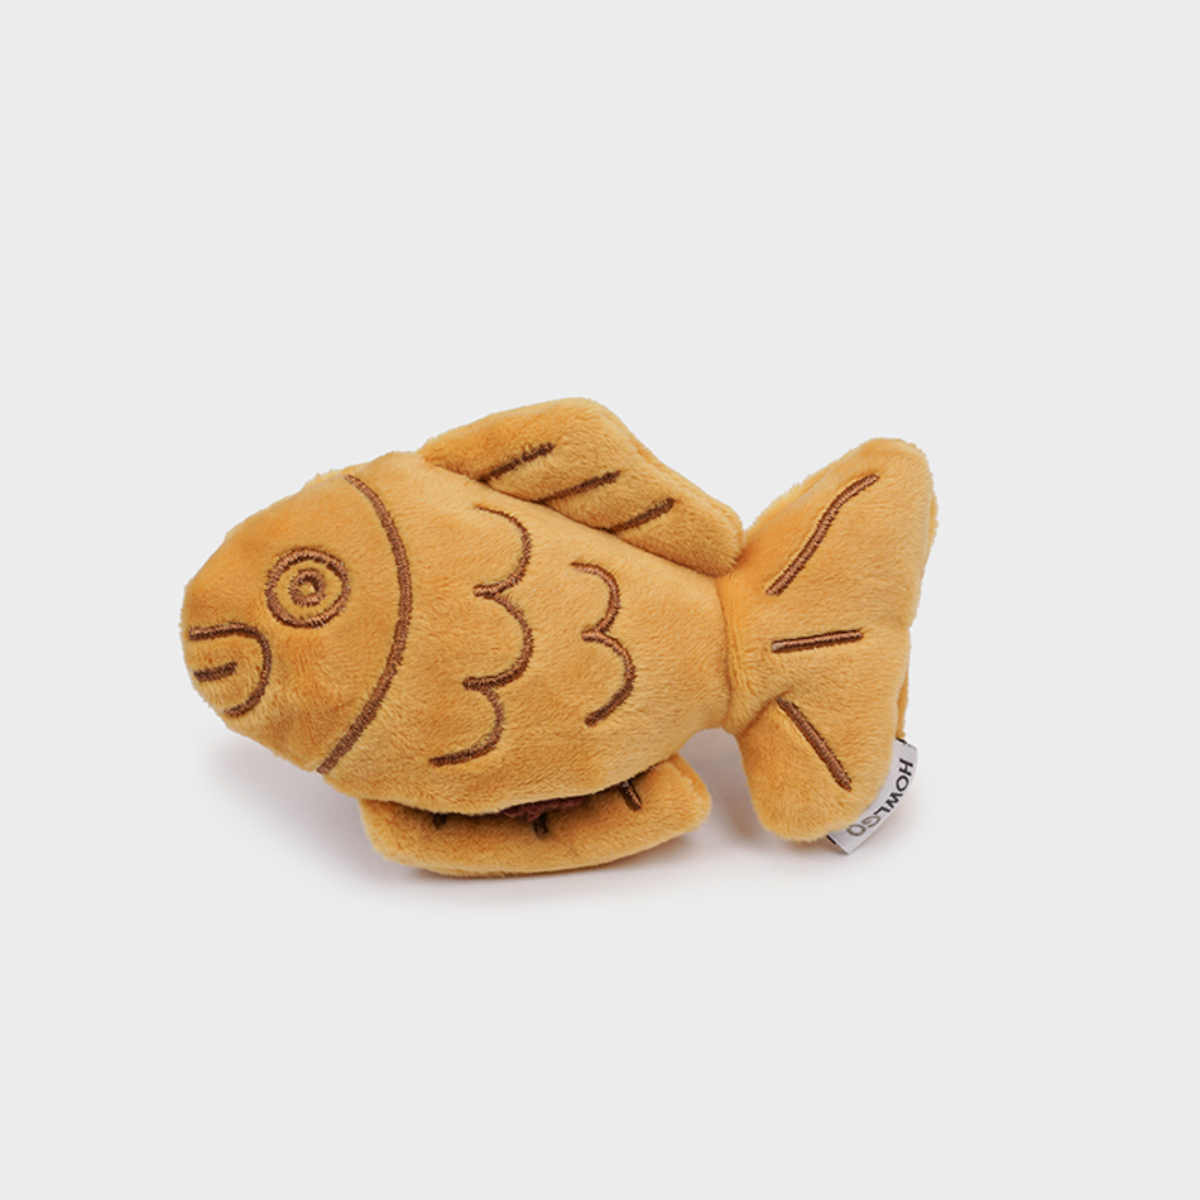 Fish Bread Nosework Dog Toy - The Tail Story